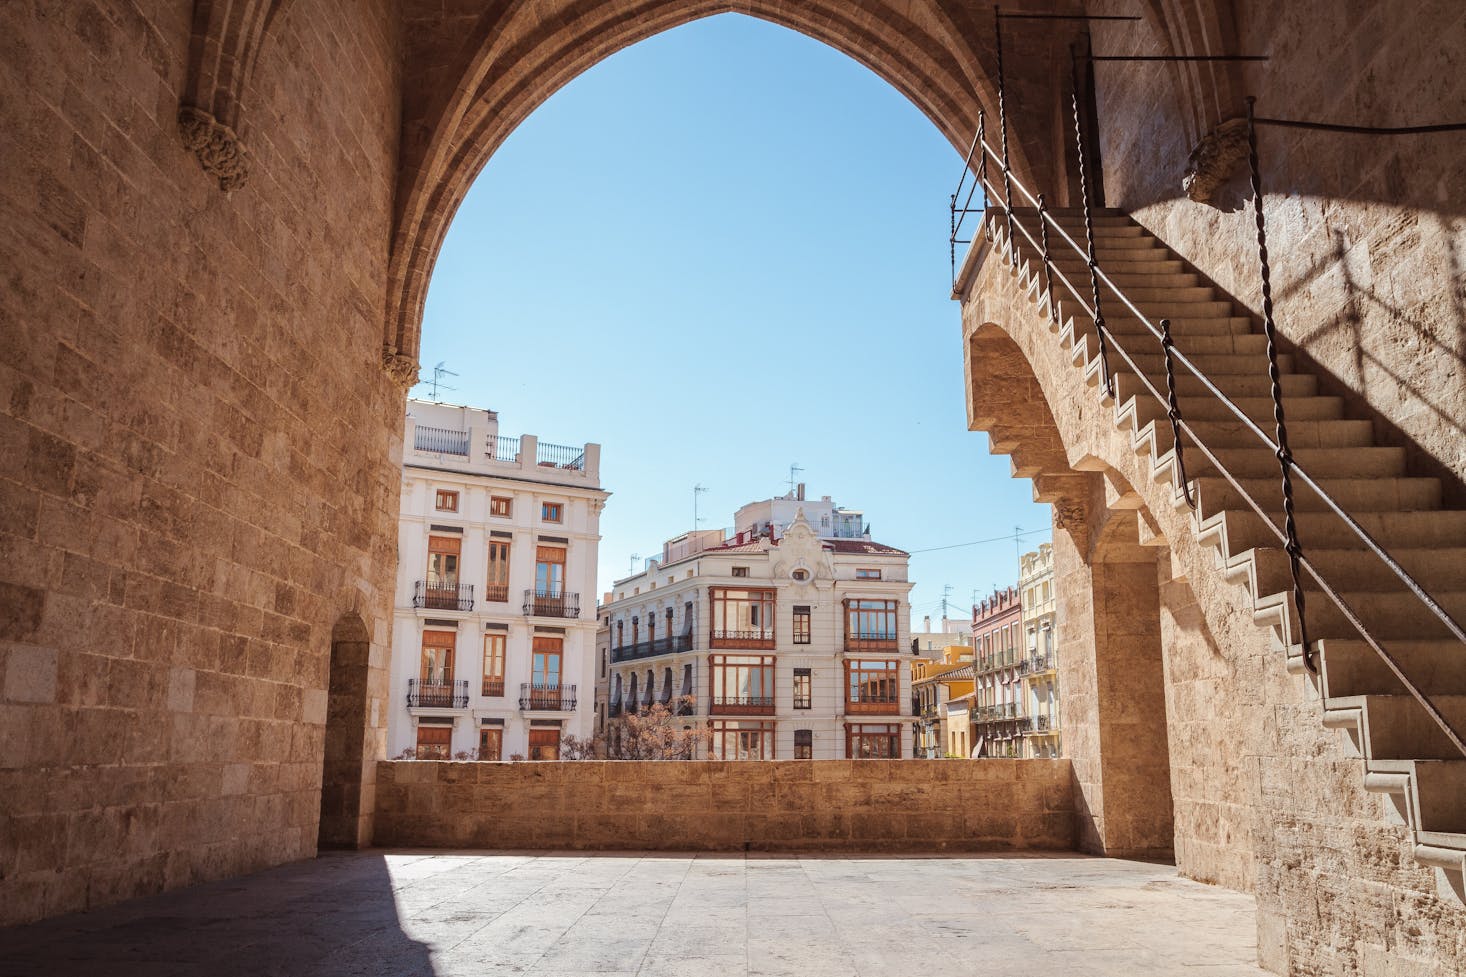 Tips for visiting Valencia on a budget